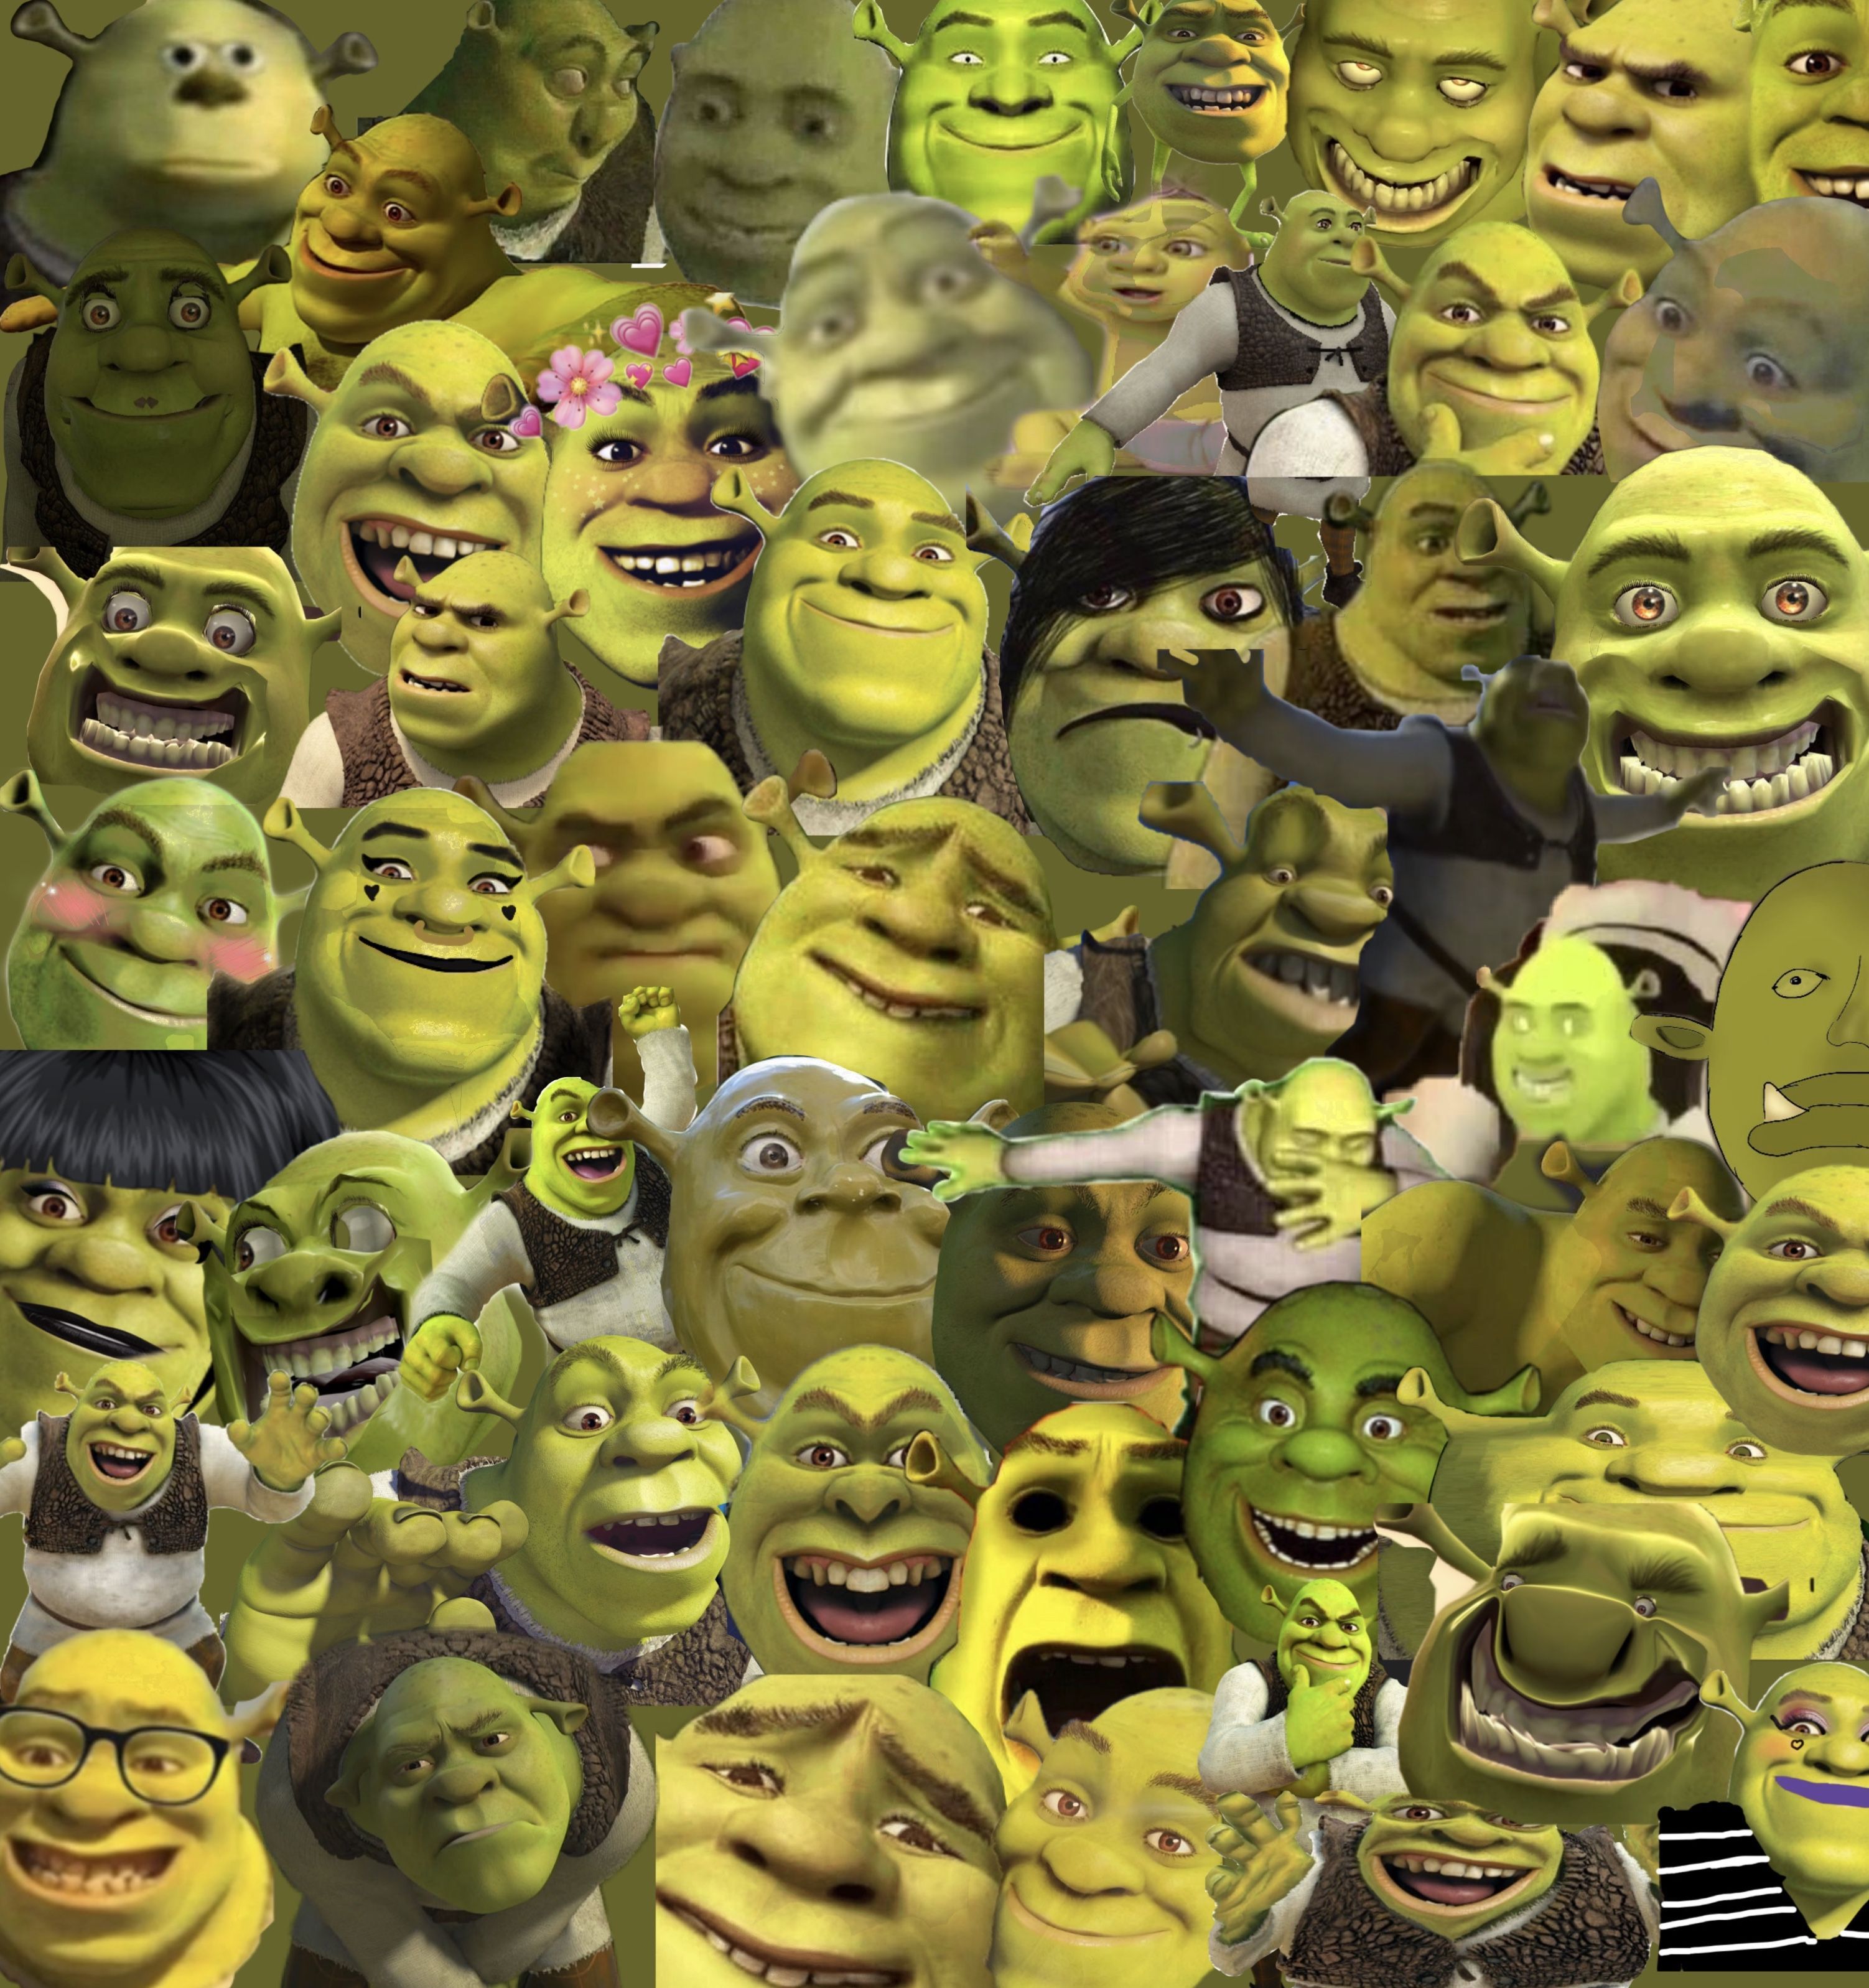 A photo of many different Shrek faces collaged together - Shrek